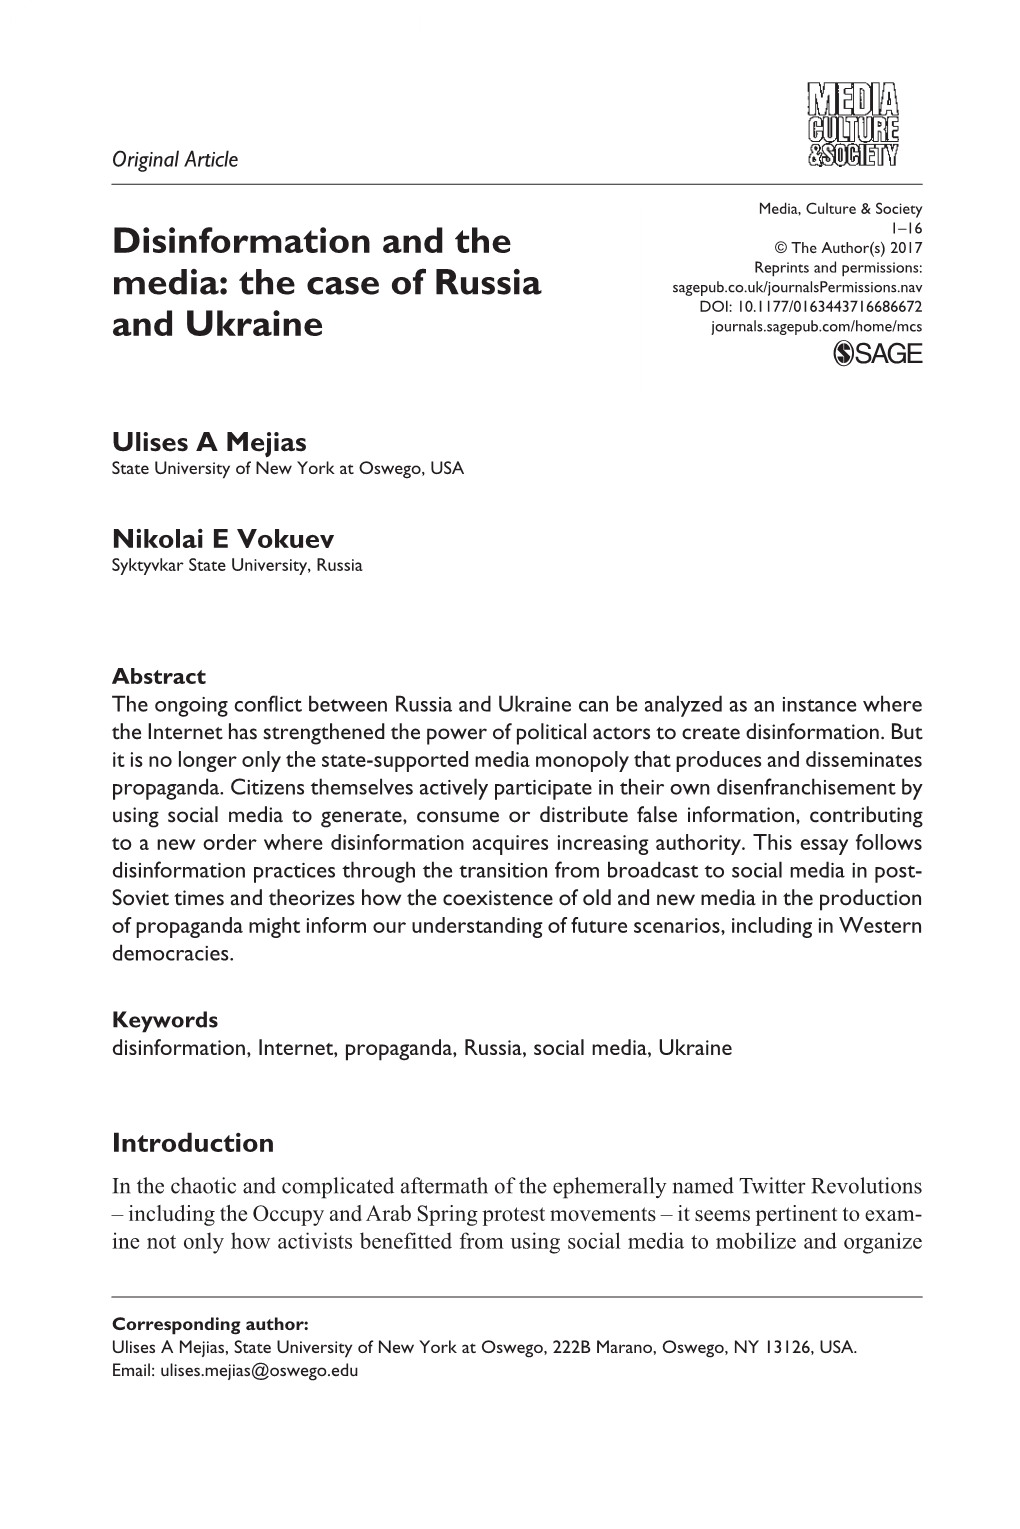 Disinformation and the Media: the Case of Russia and Ukraine